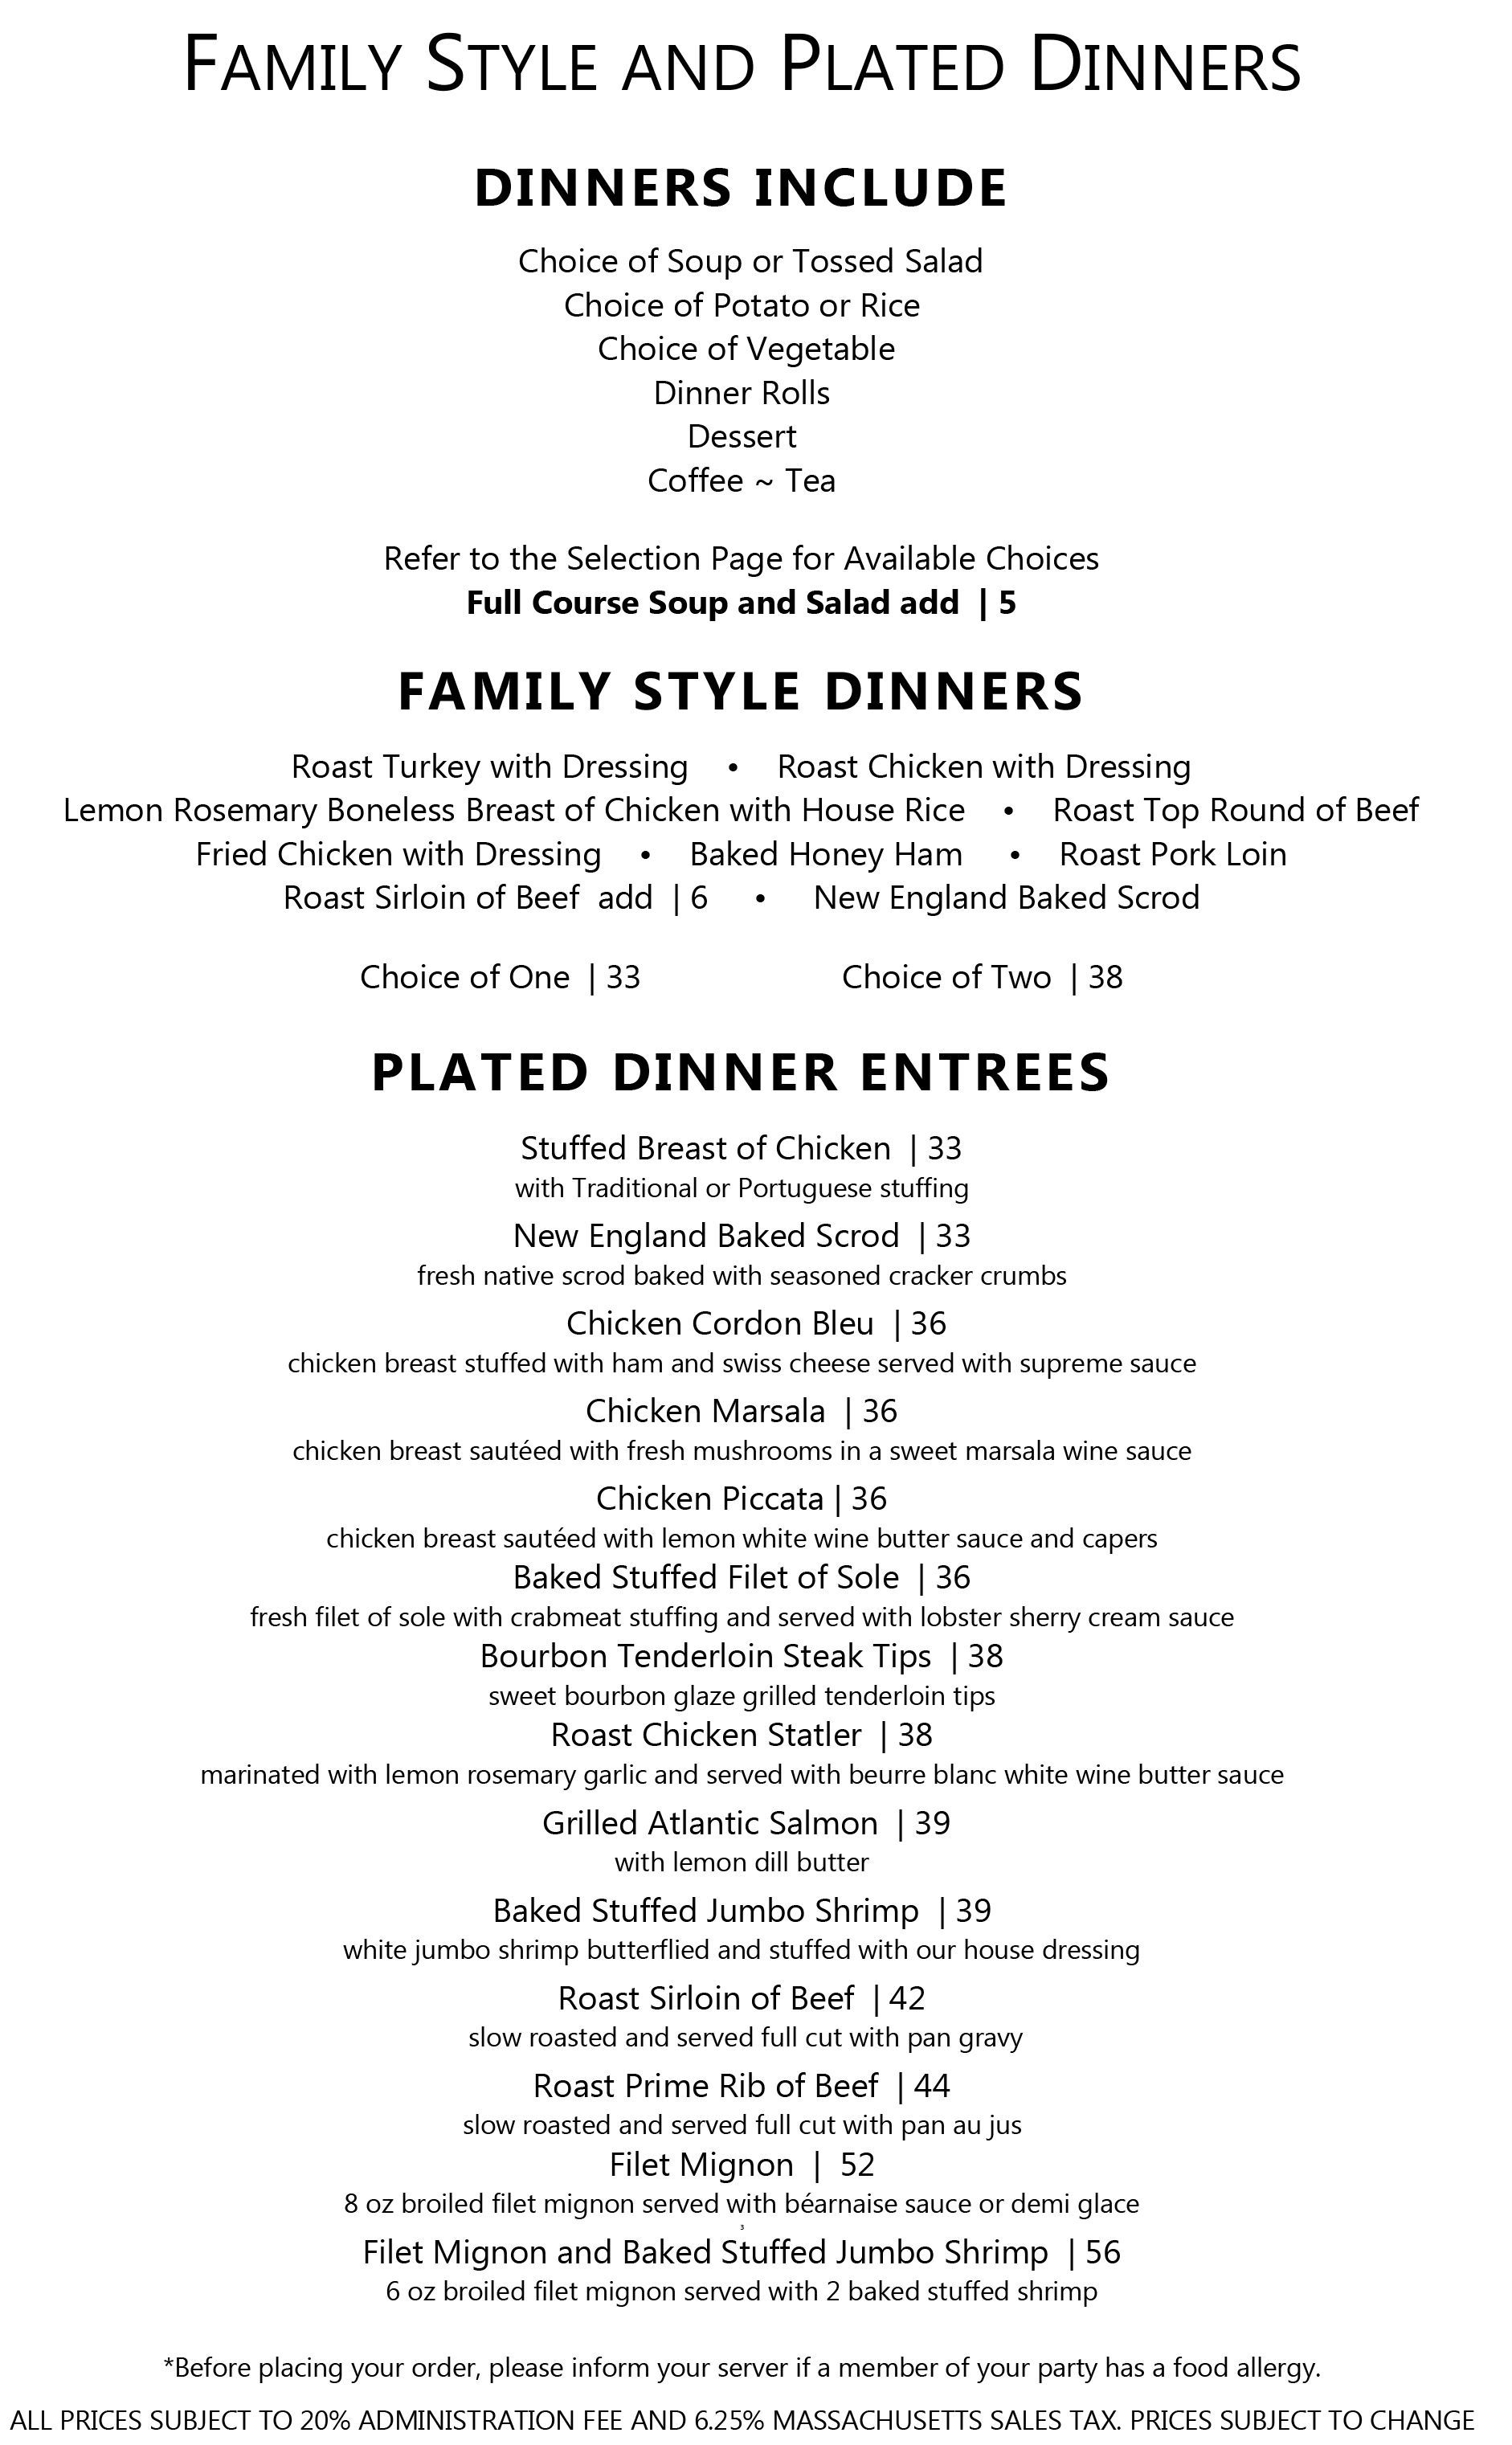 Family Style and Plated Dinners Menu